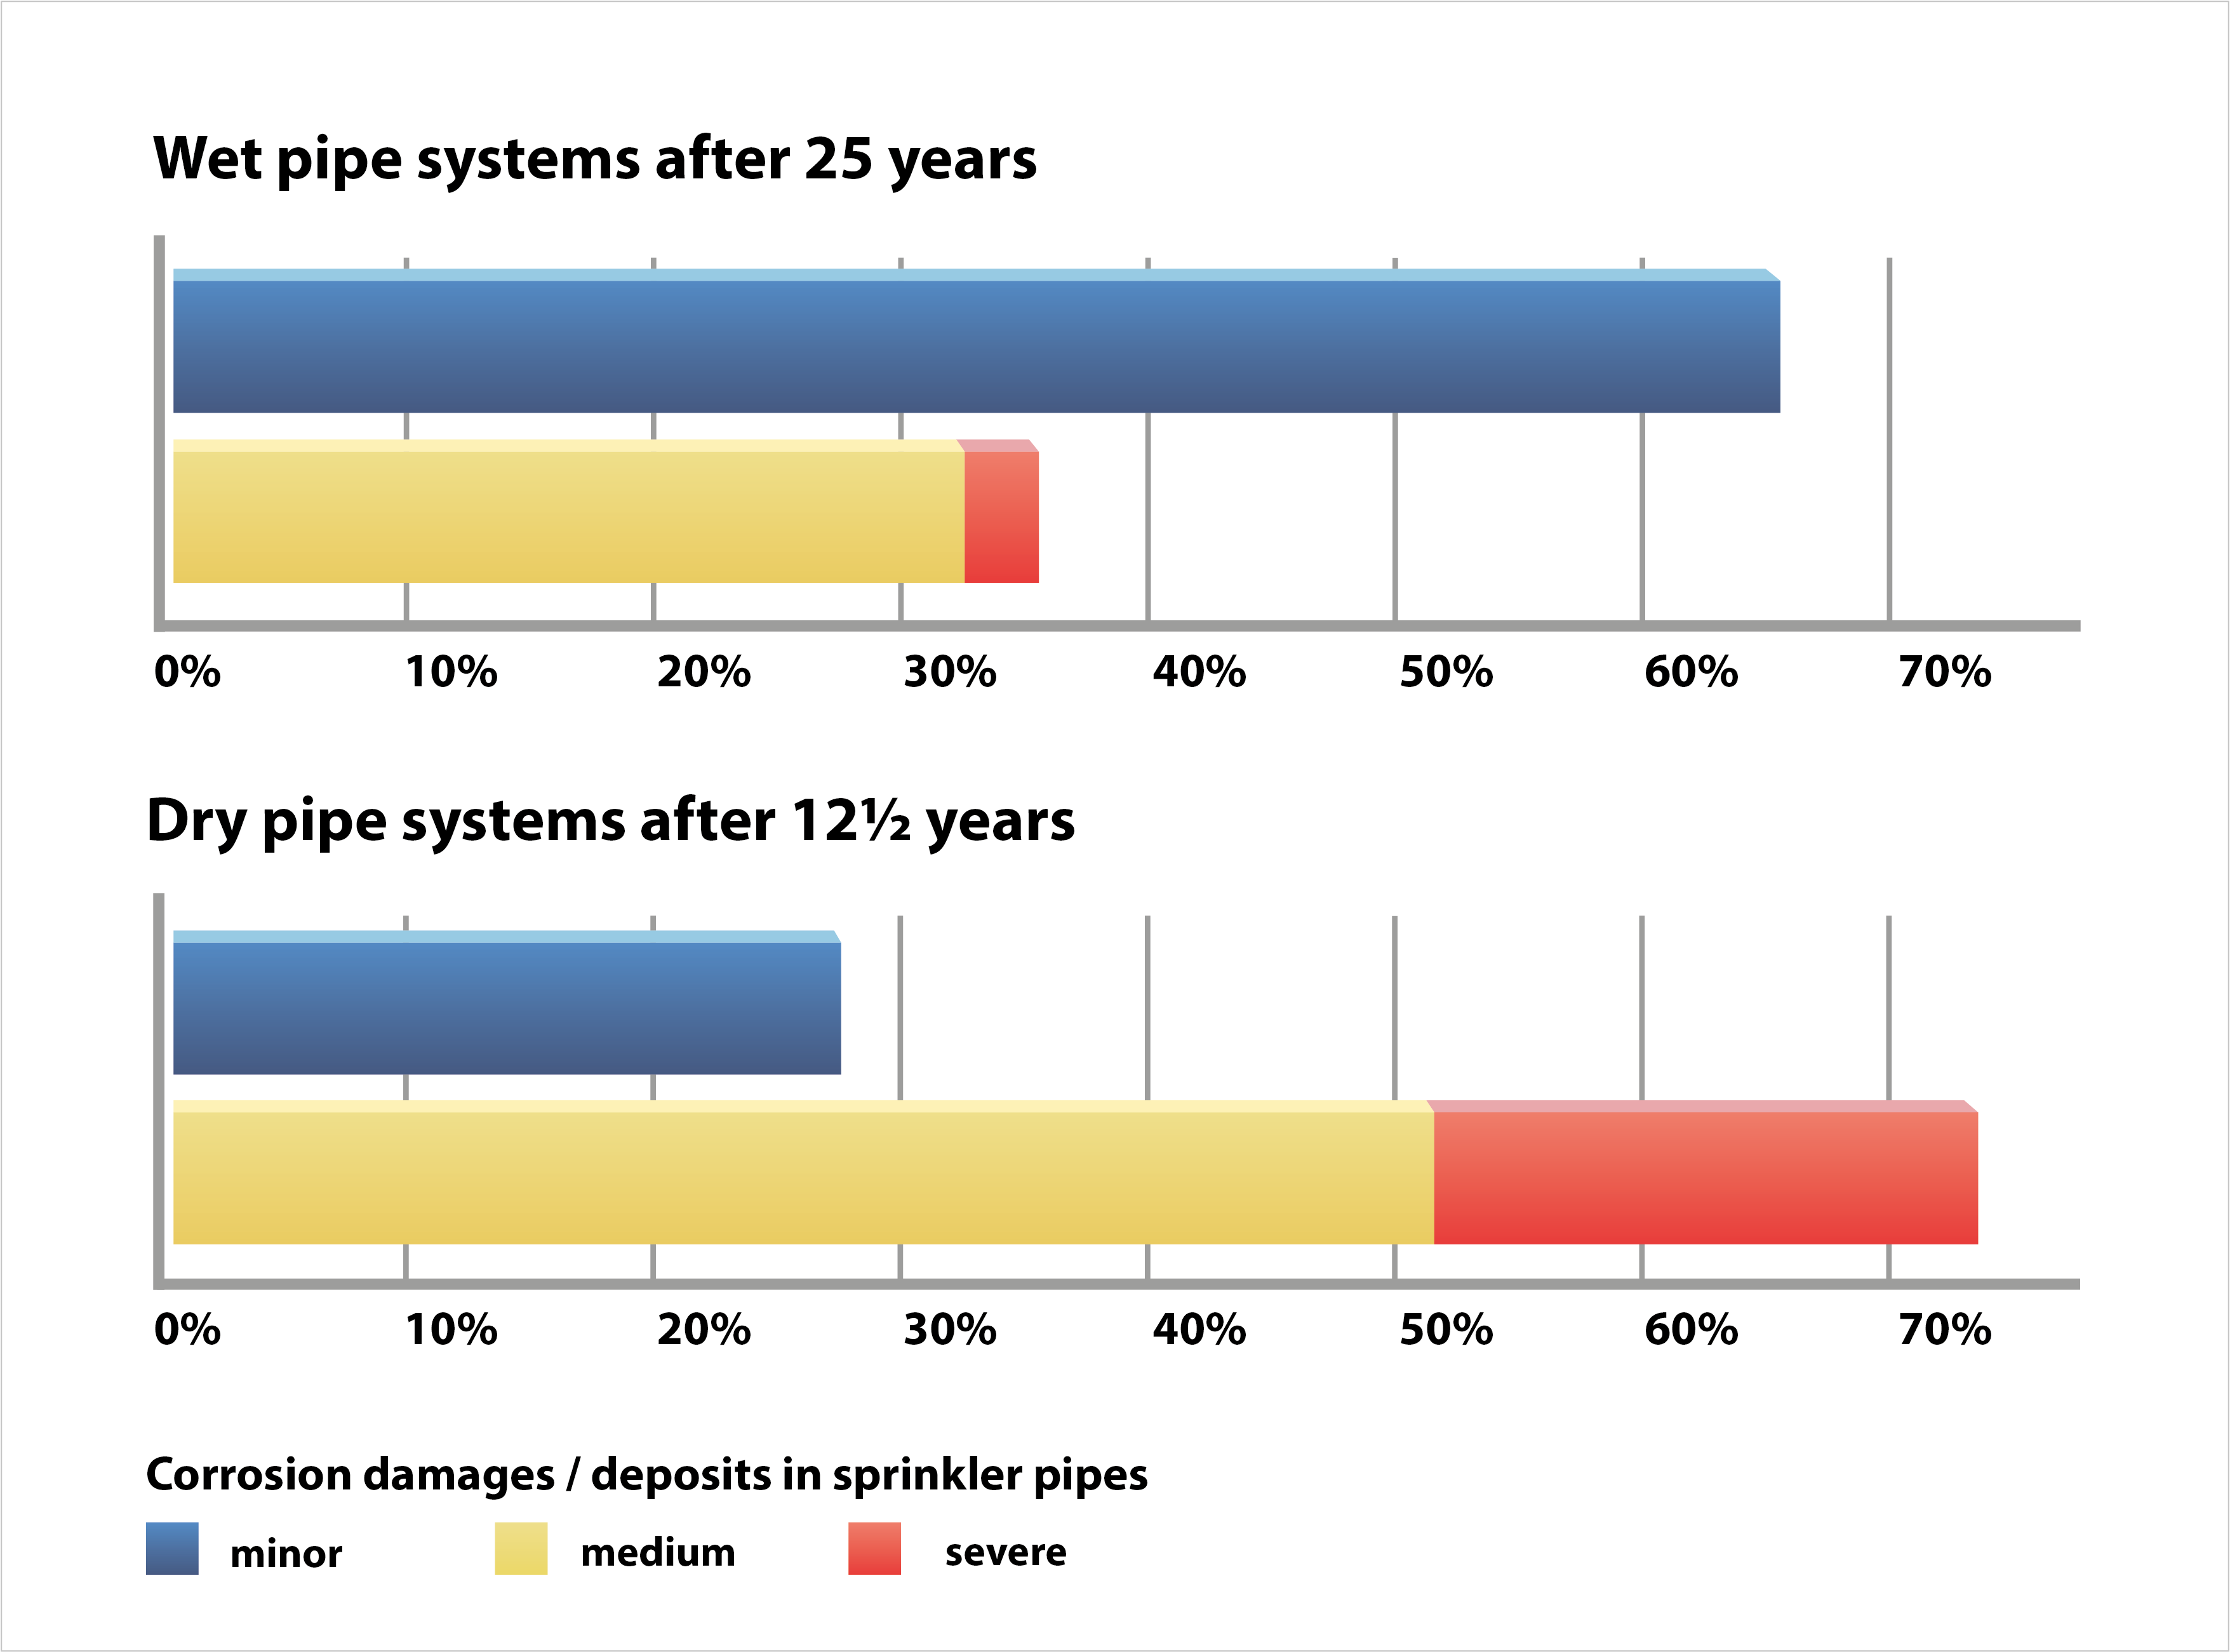 Comparison of corrosion damages and deposits in wet pipe systems and dry pipe systems